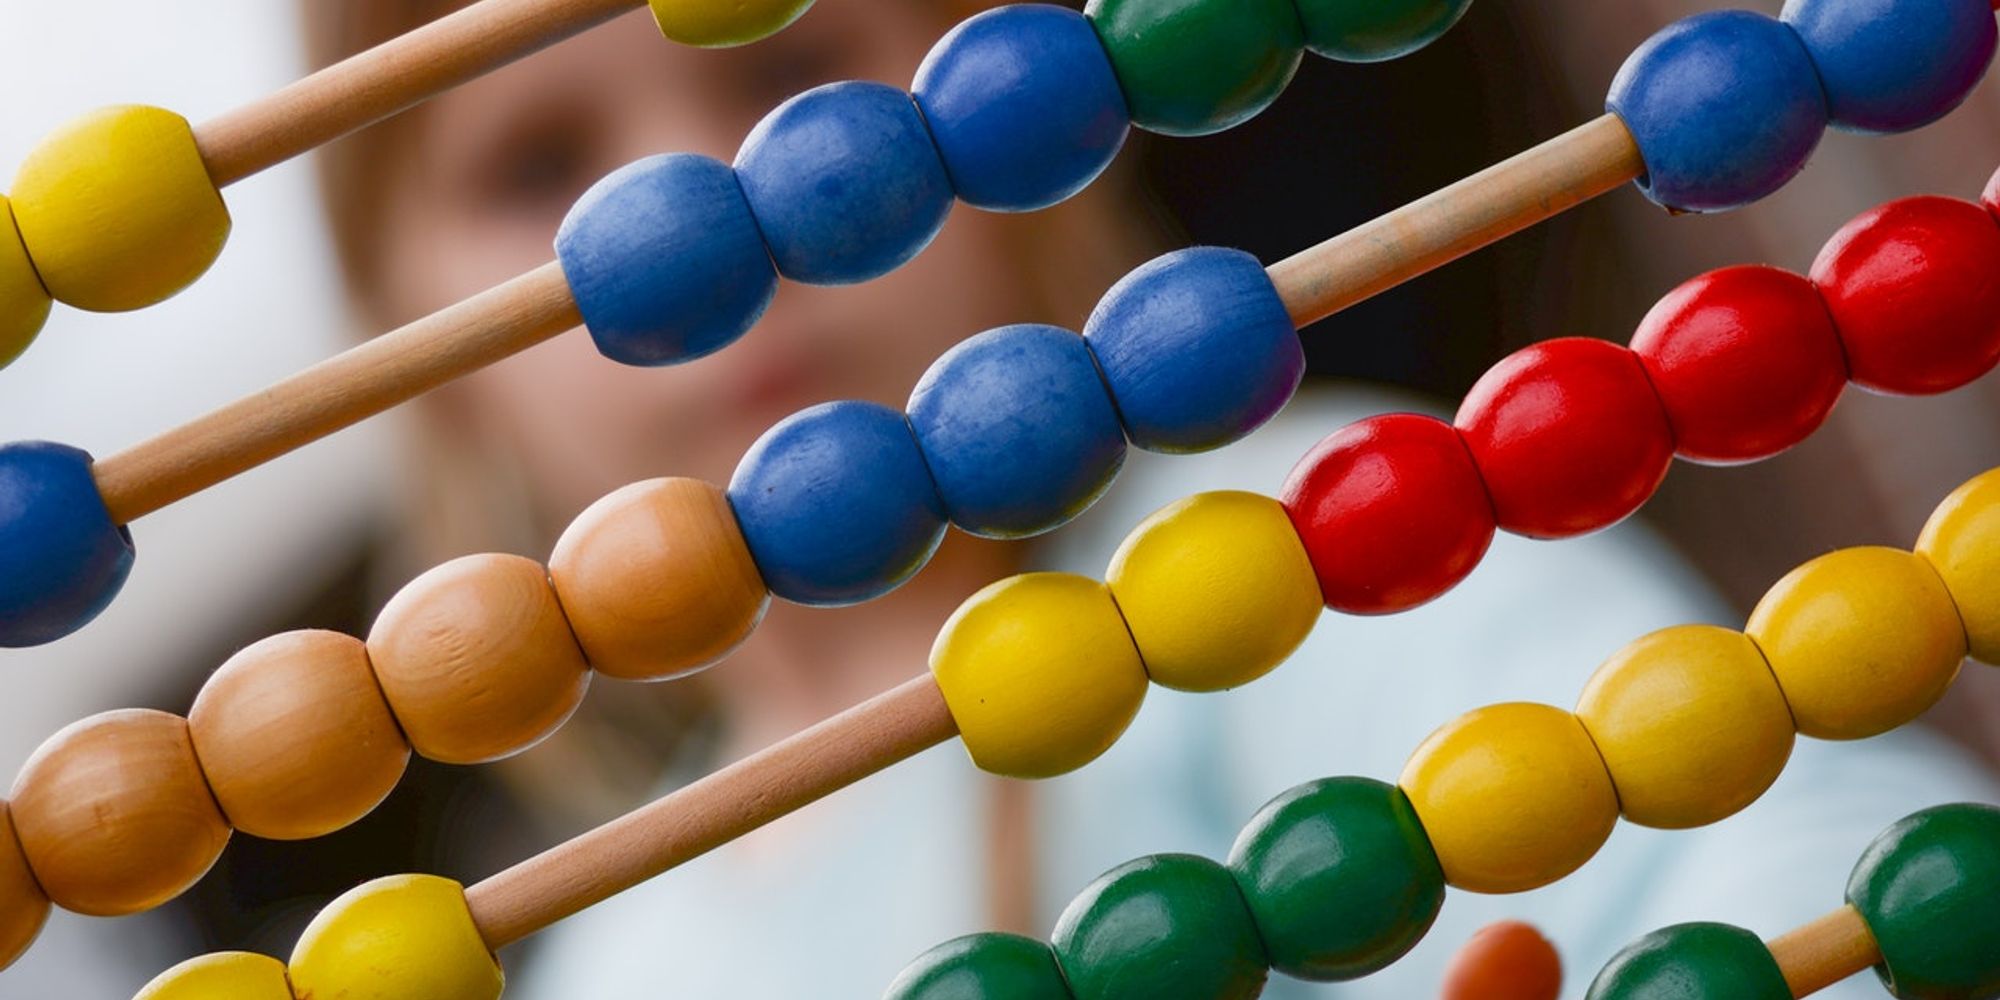 Multicolored Abacus Photography 1019470